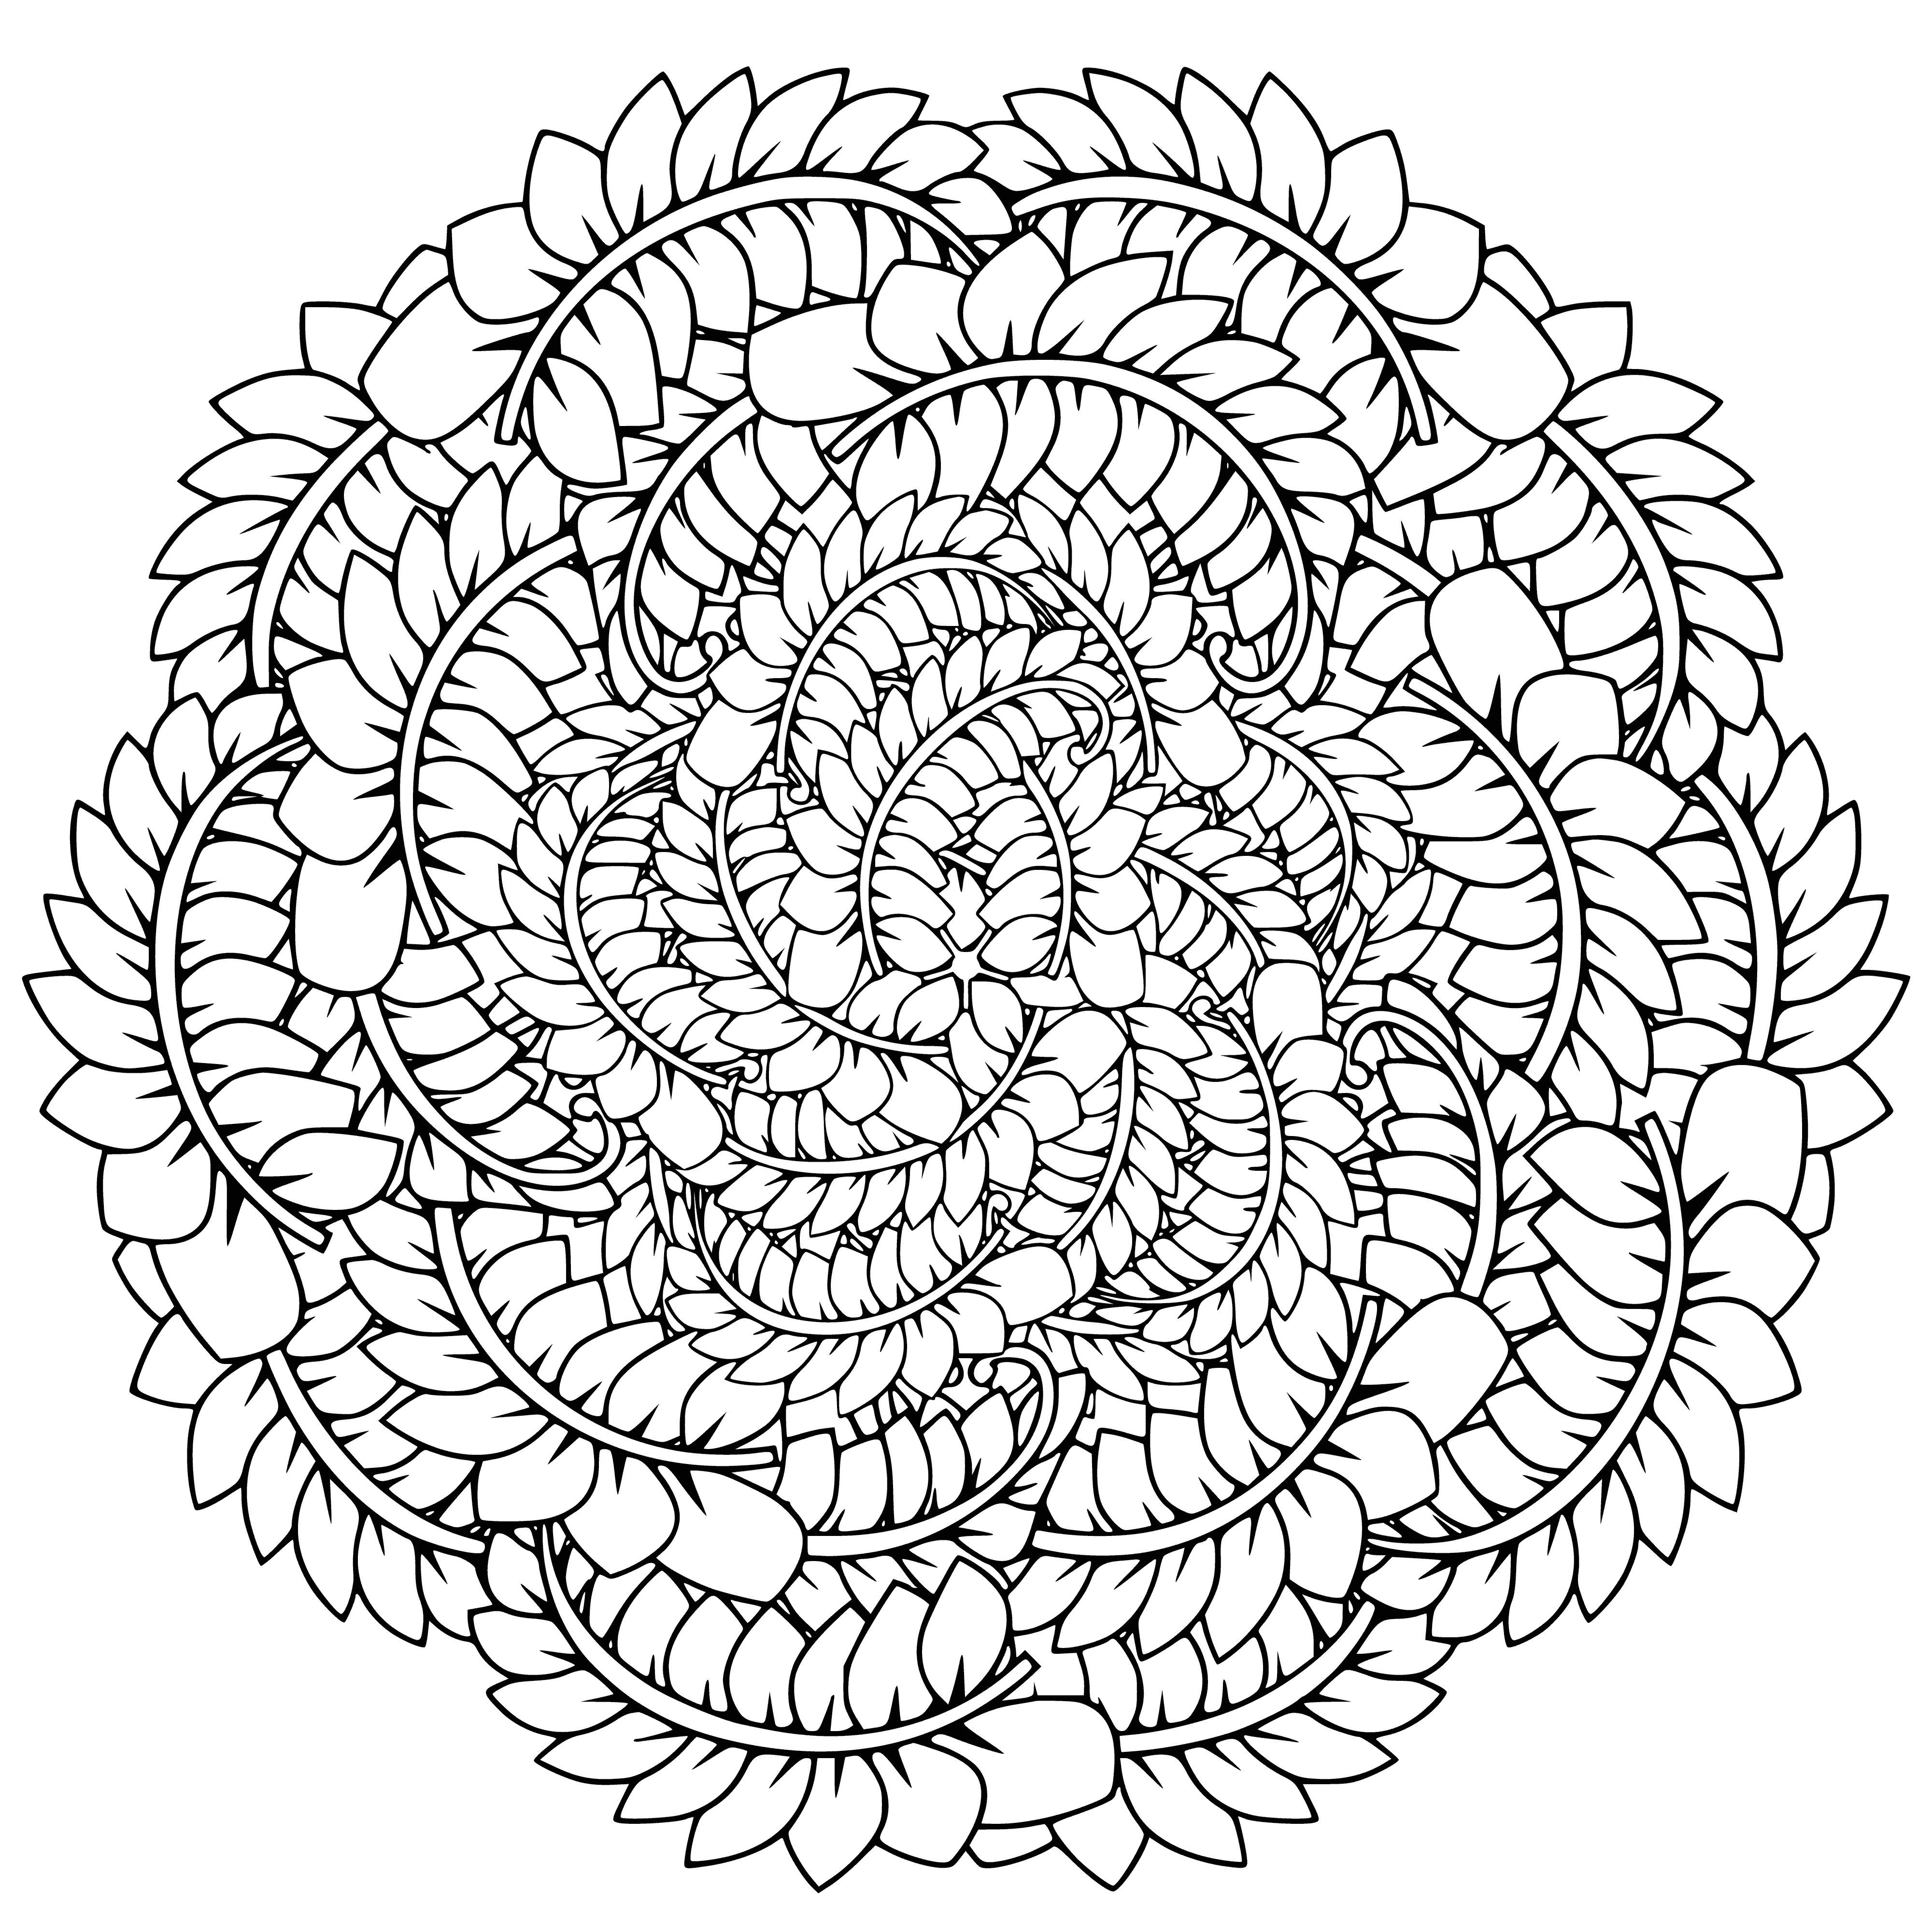 coloring page: A large flower with 8 petals in multiple shades of purple, blue and yellow, with 2 smaller flowers and a blue gradient background. #coloringpage